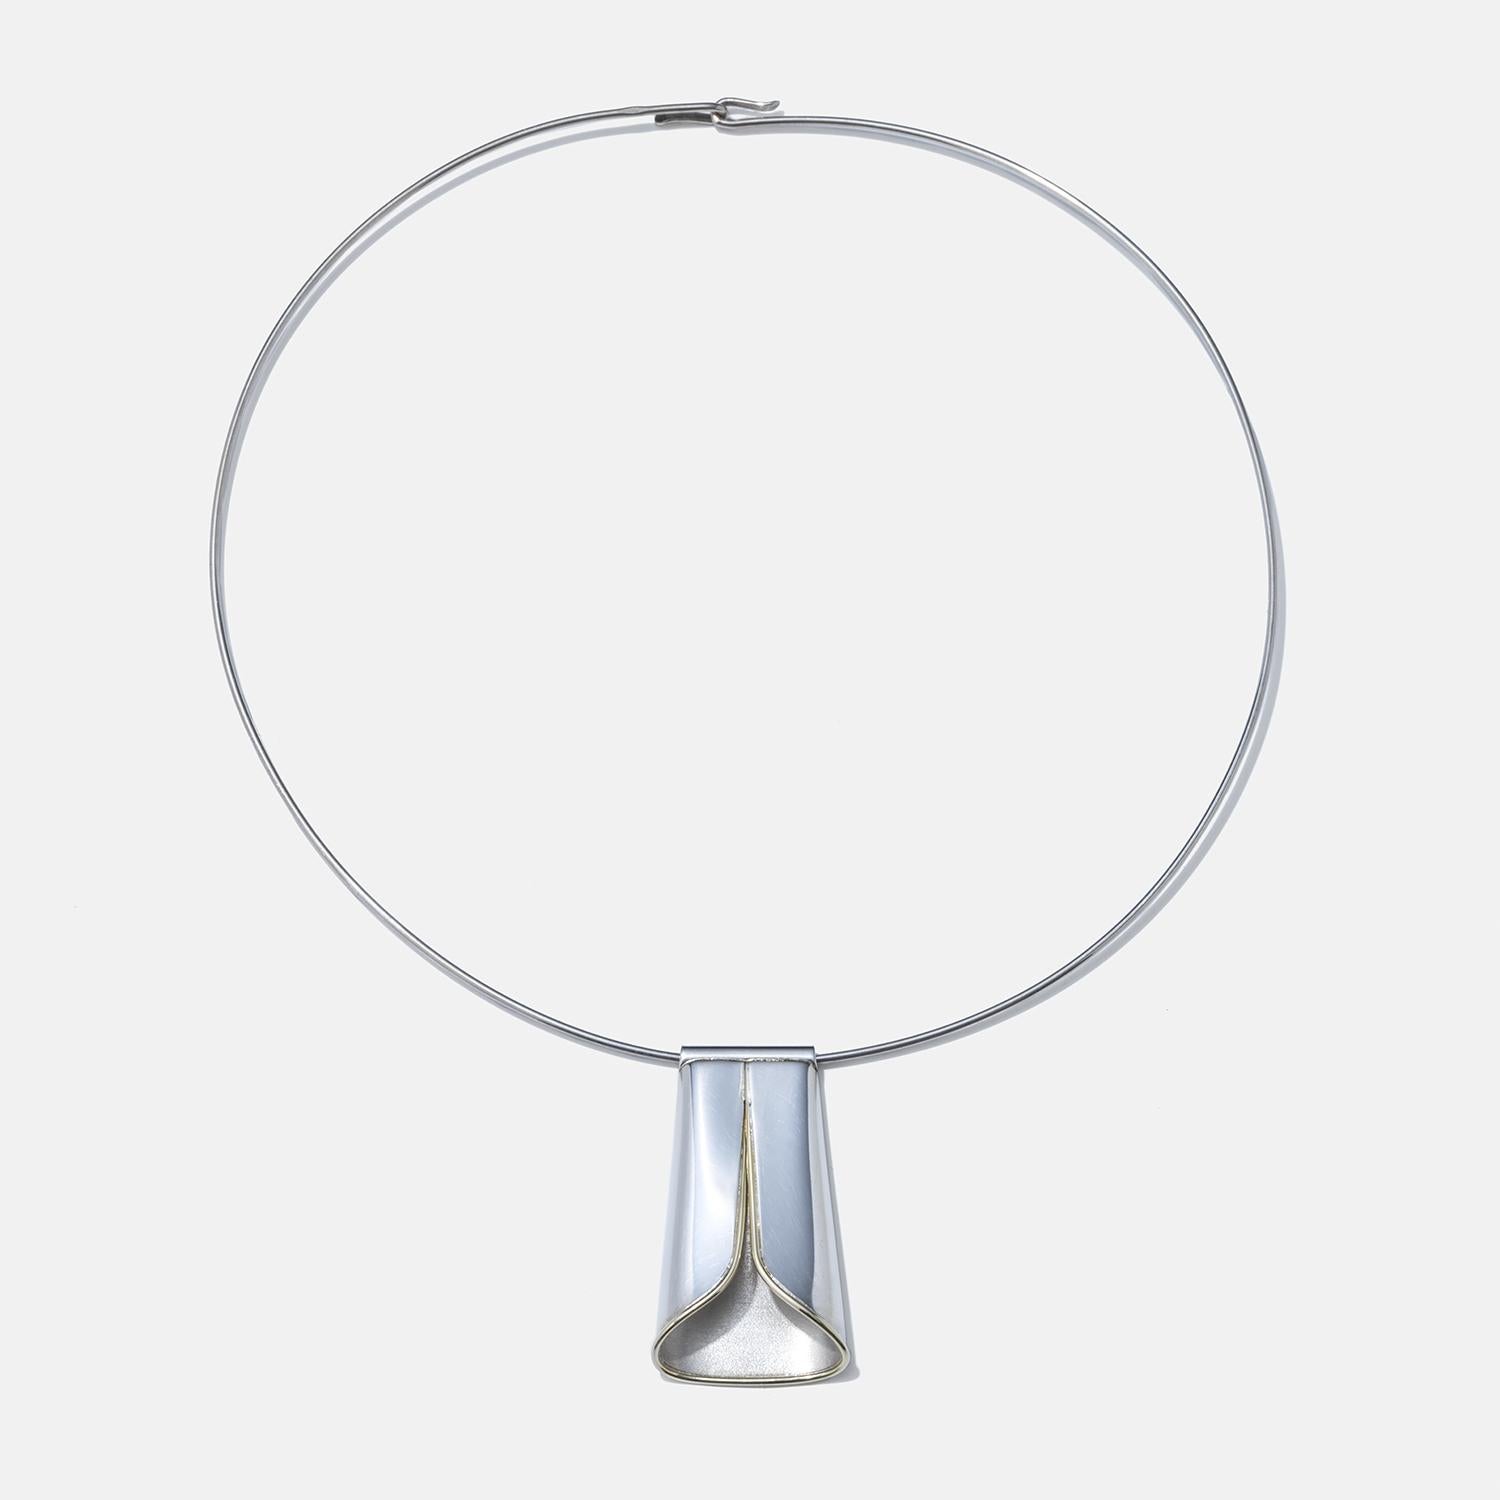 This is a sleek silver neck ring that opens at the back, making it easy to slip on and off. The pendant has a modern, broad V shape with a smooth silver finish and striking 18 karat gold edges that highlight its contours. The neck ring clasps